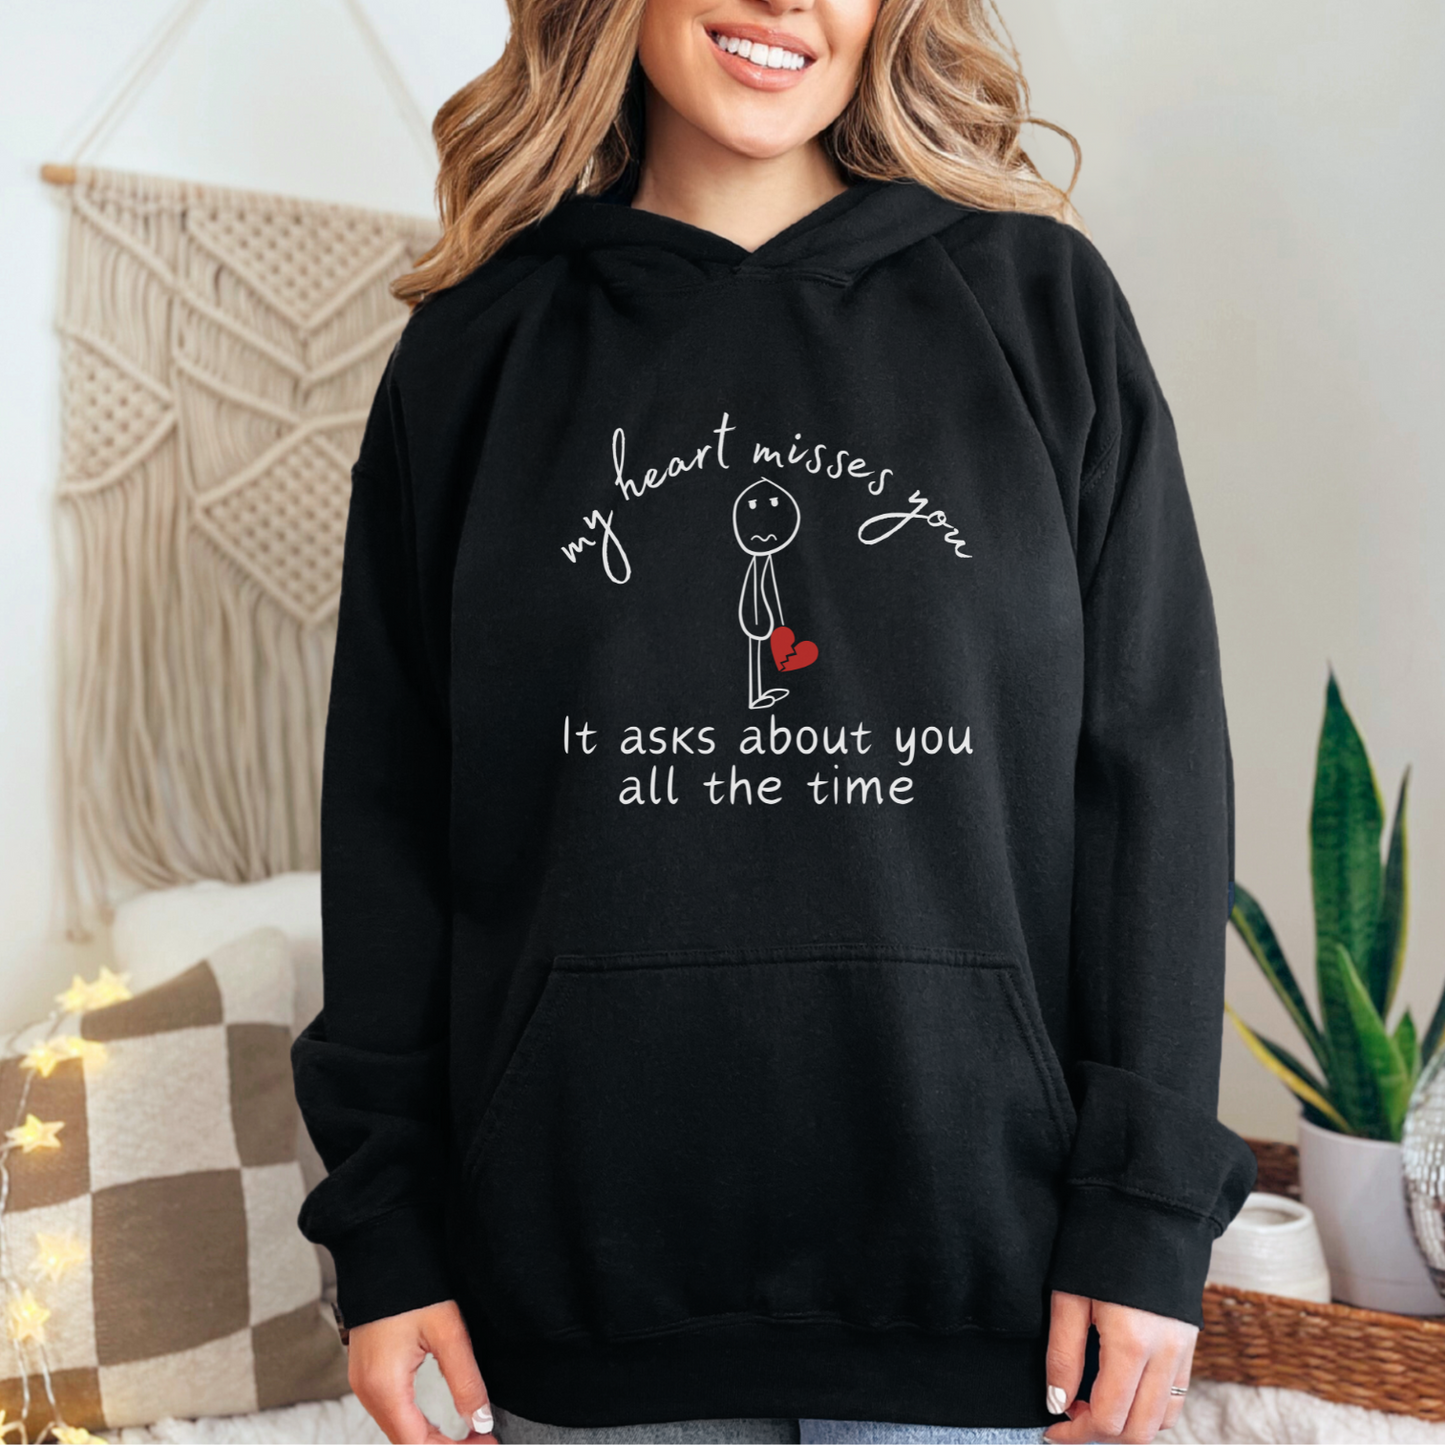 Black Gildan 18500 hoodie sweatshirt. Designed for those who carry their memories in their hearts. Perfect gift for grieving friend "my heart misses you, it asks about you all the time"